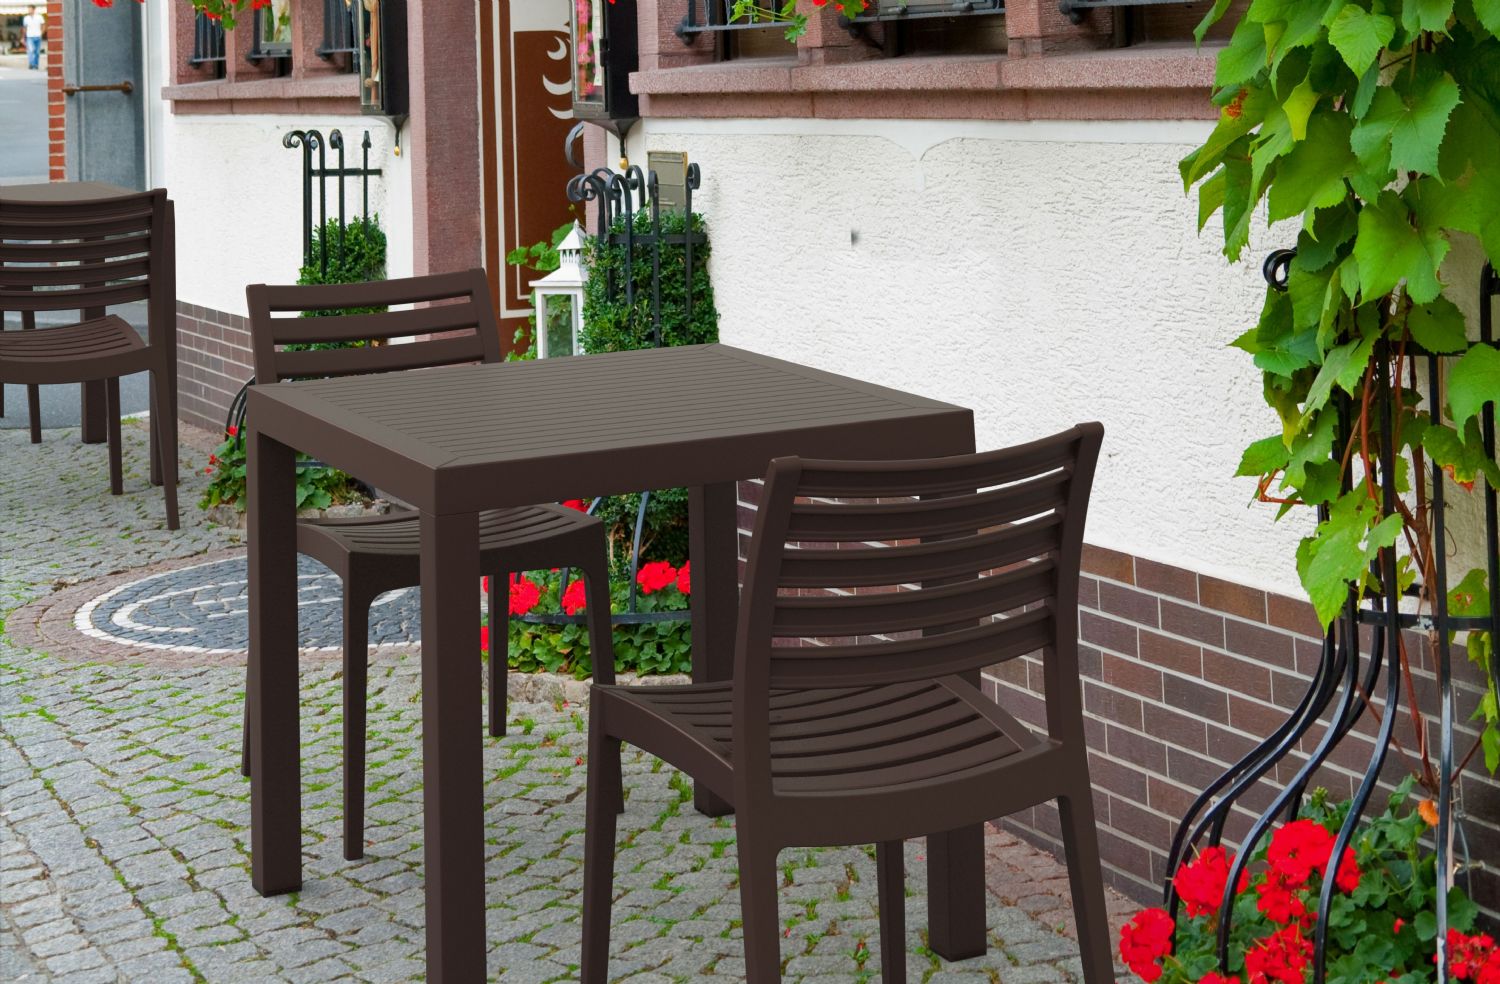 Ares Resin Outdoor Dining Chair Brown ISP009-BRW - 7